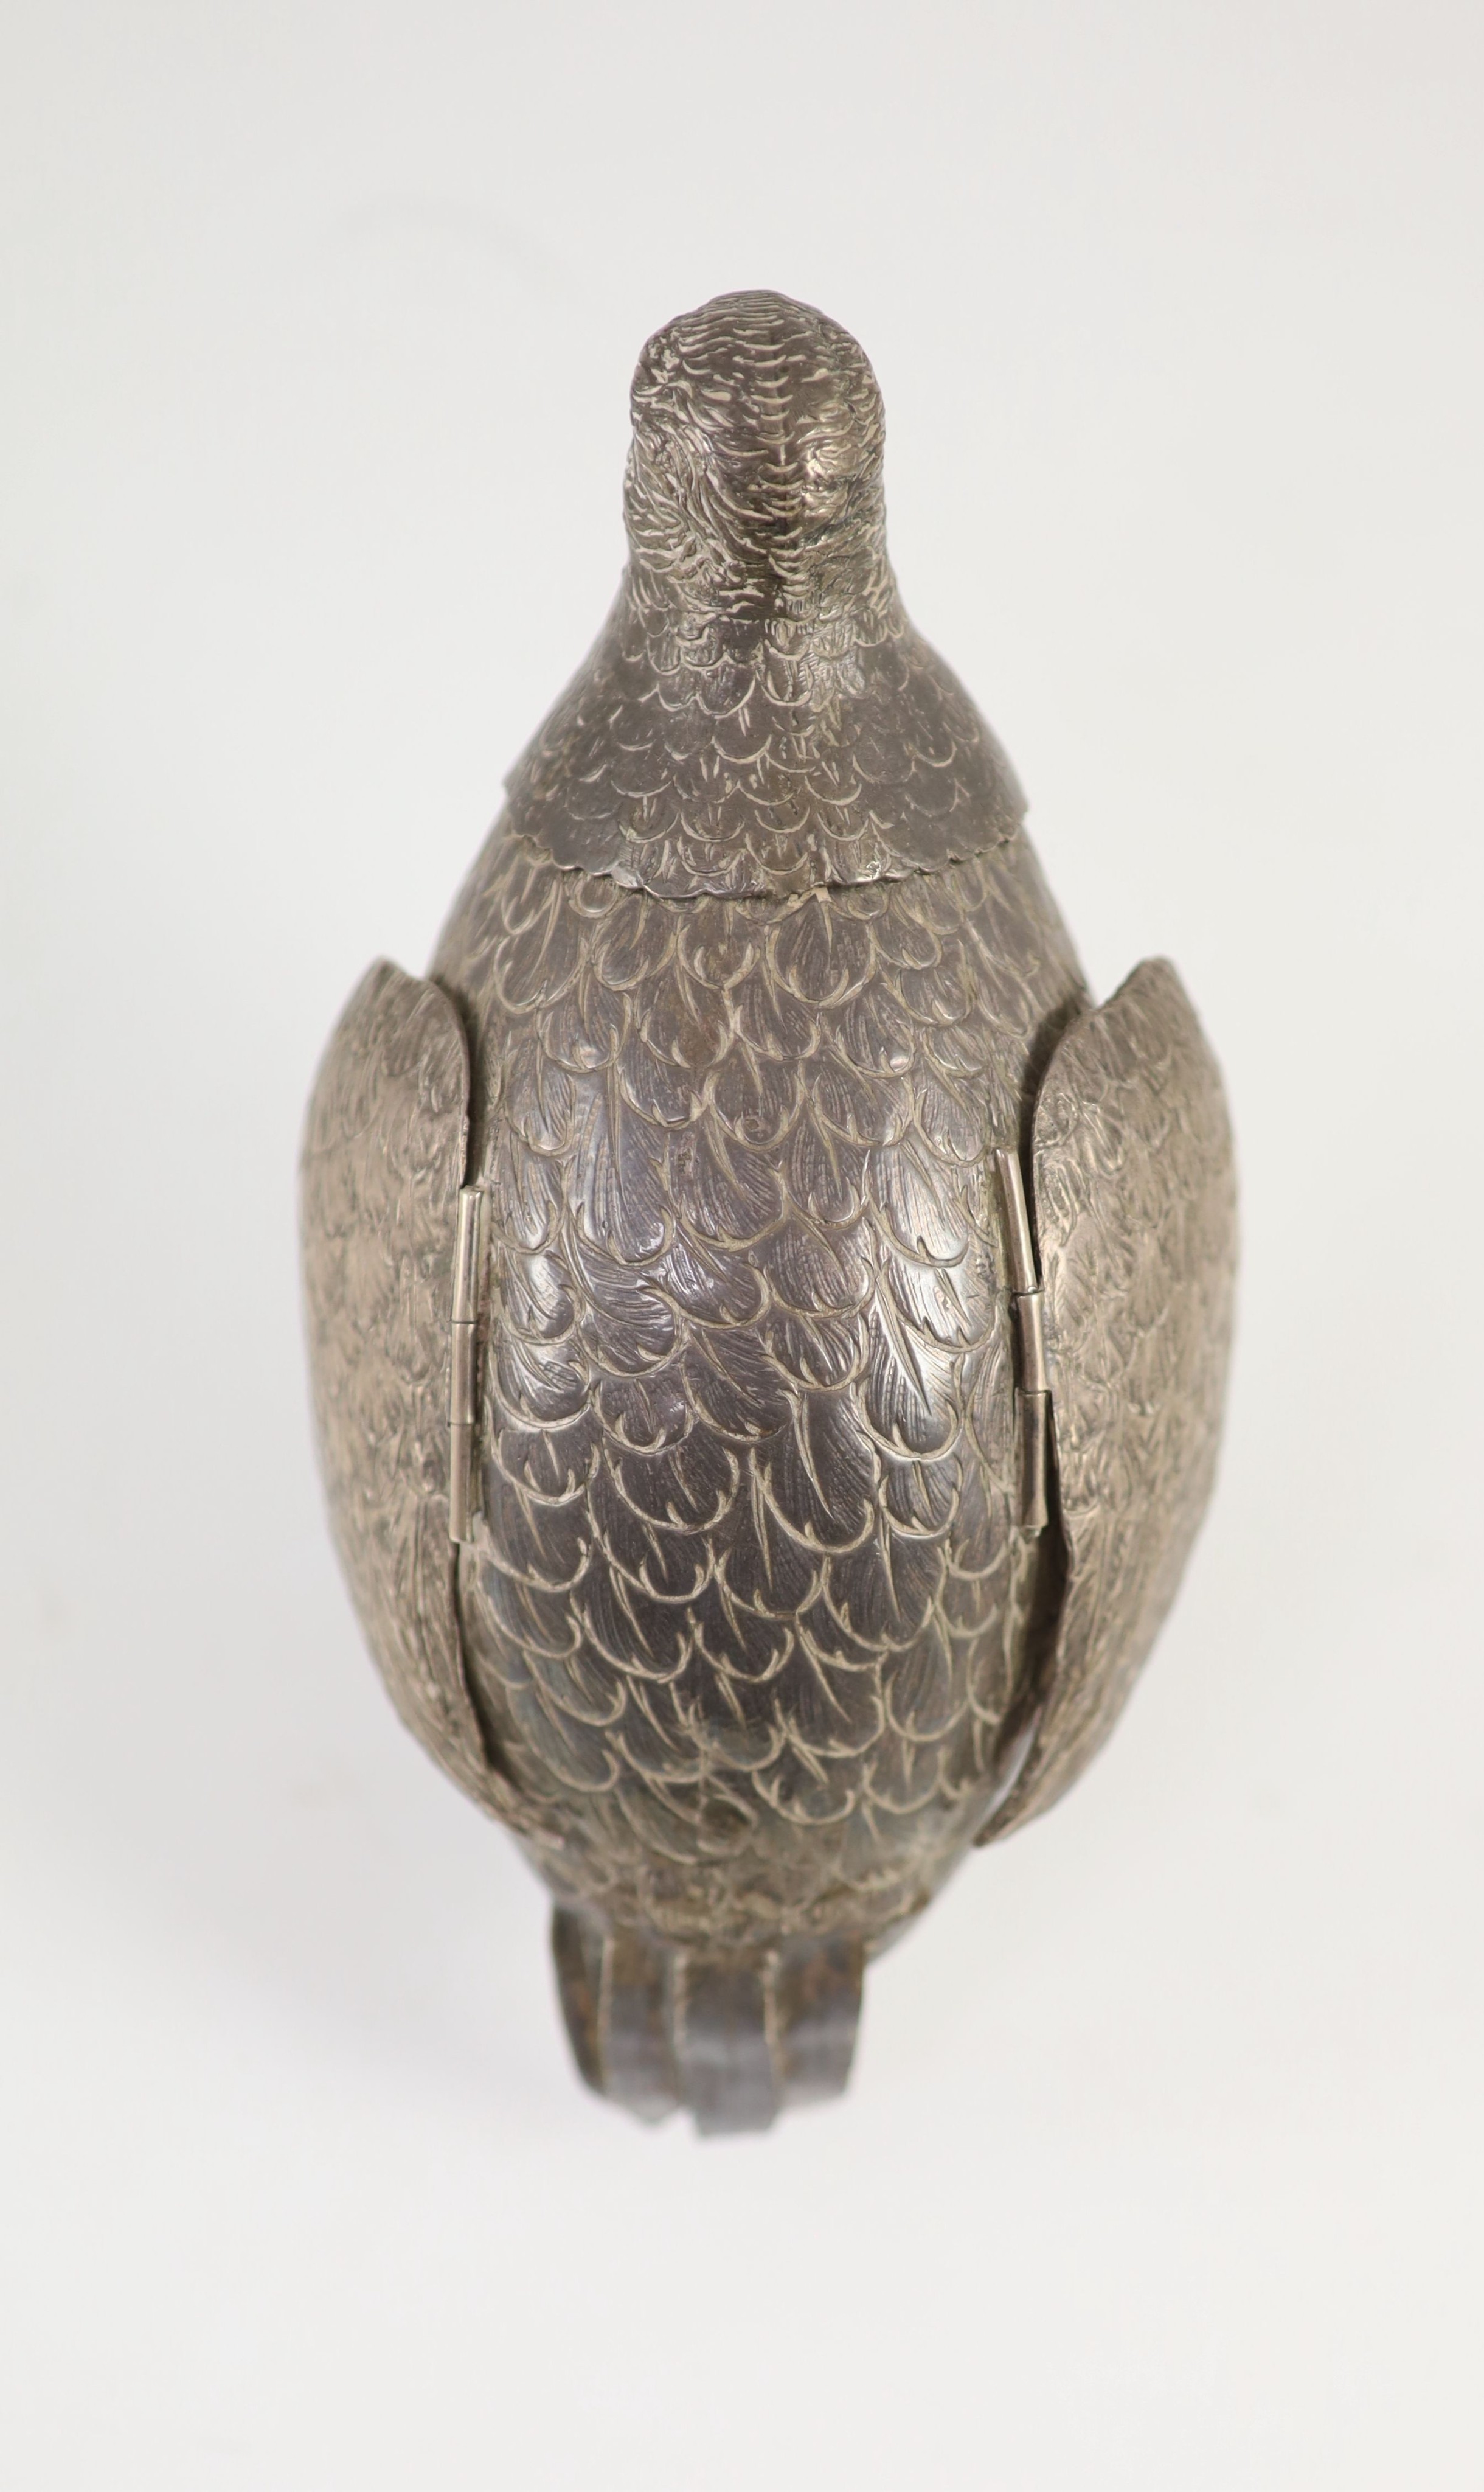 A late Victorian silver free-standing model of a grouse